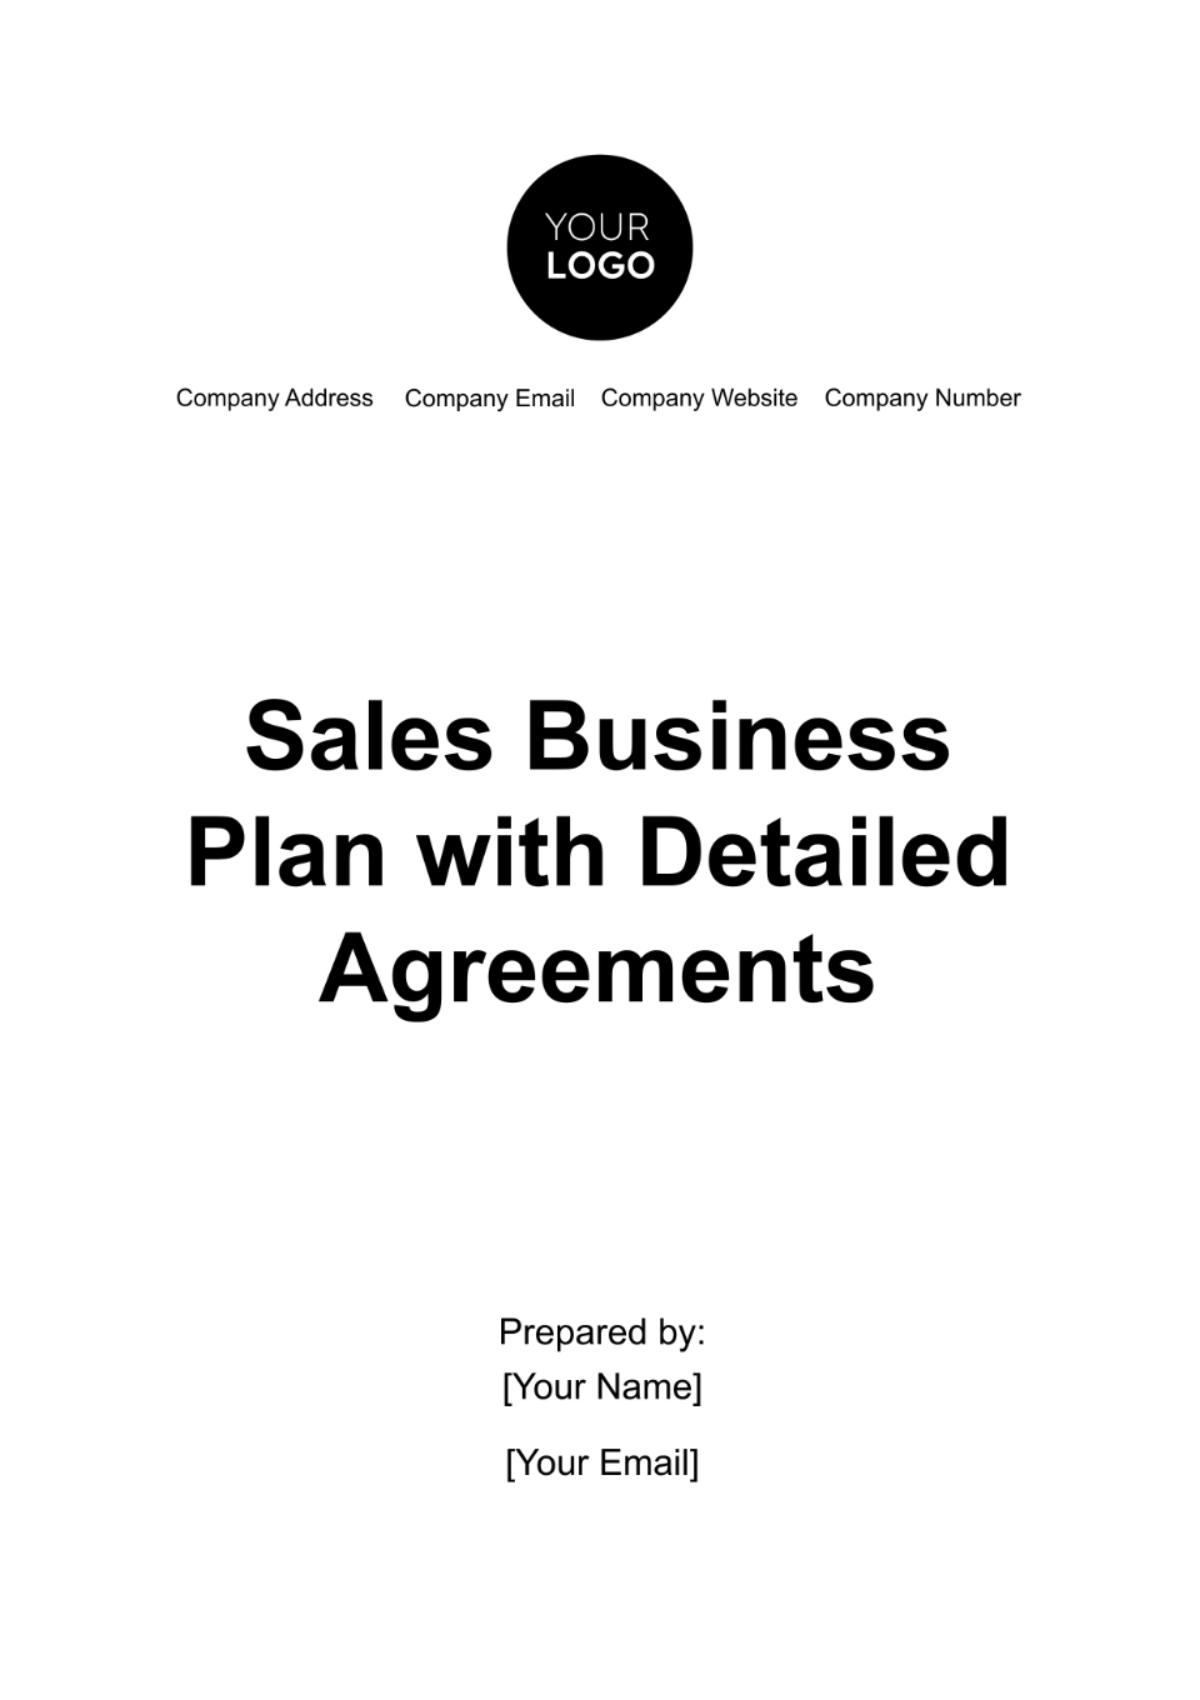 Sales Business Plan with Detailed Agreements Template